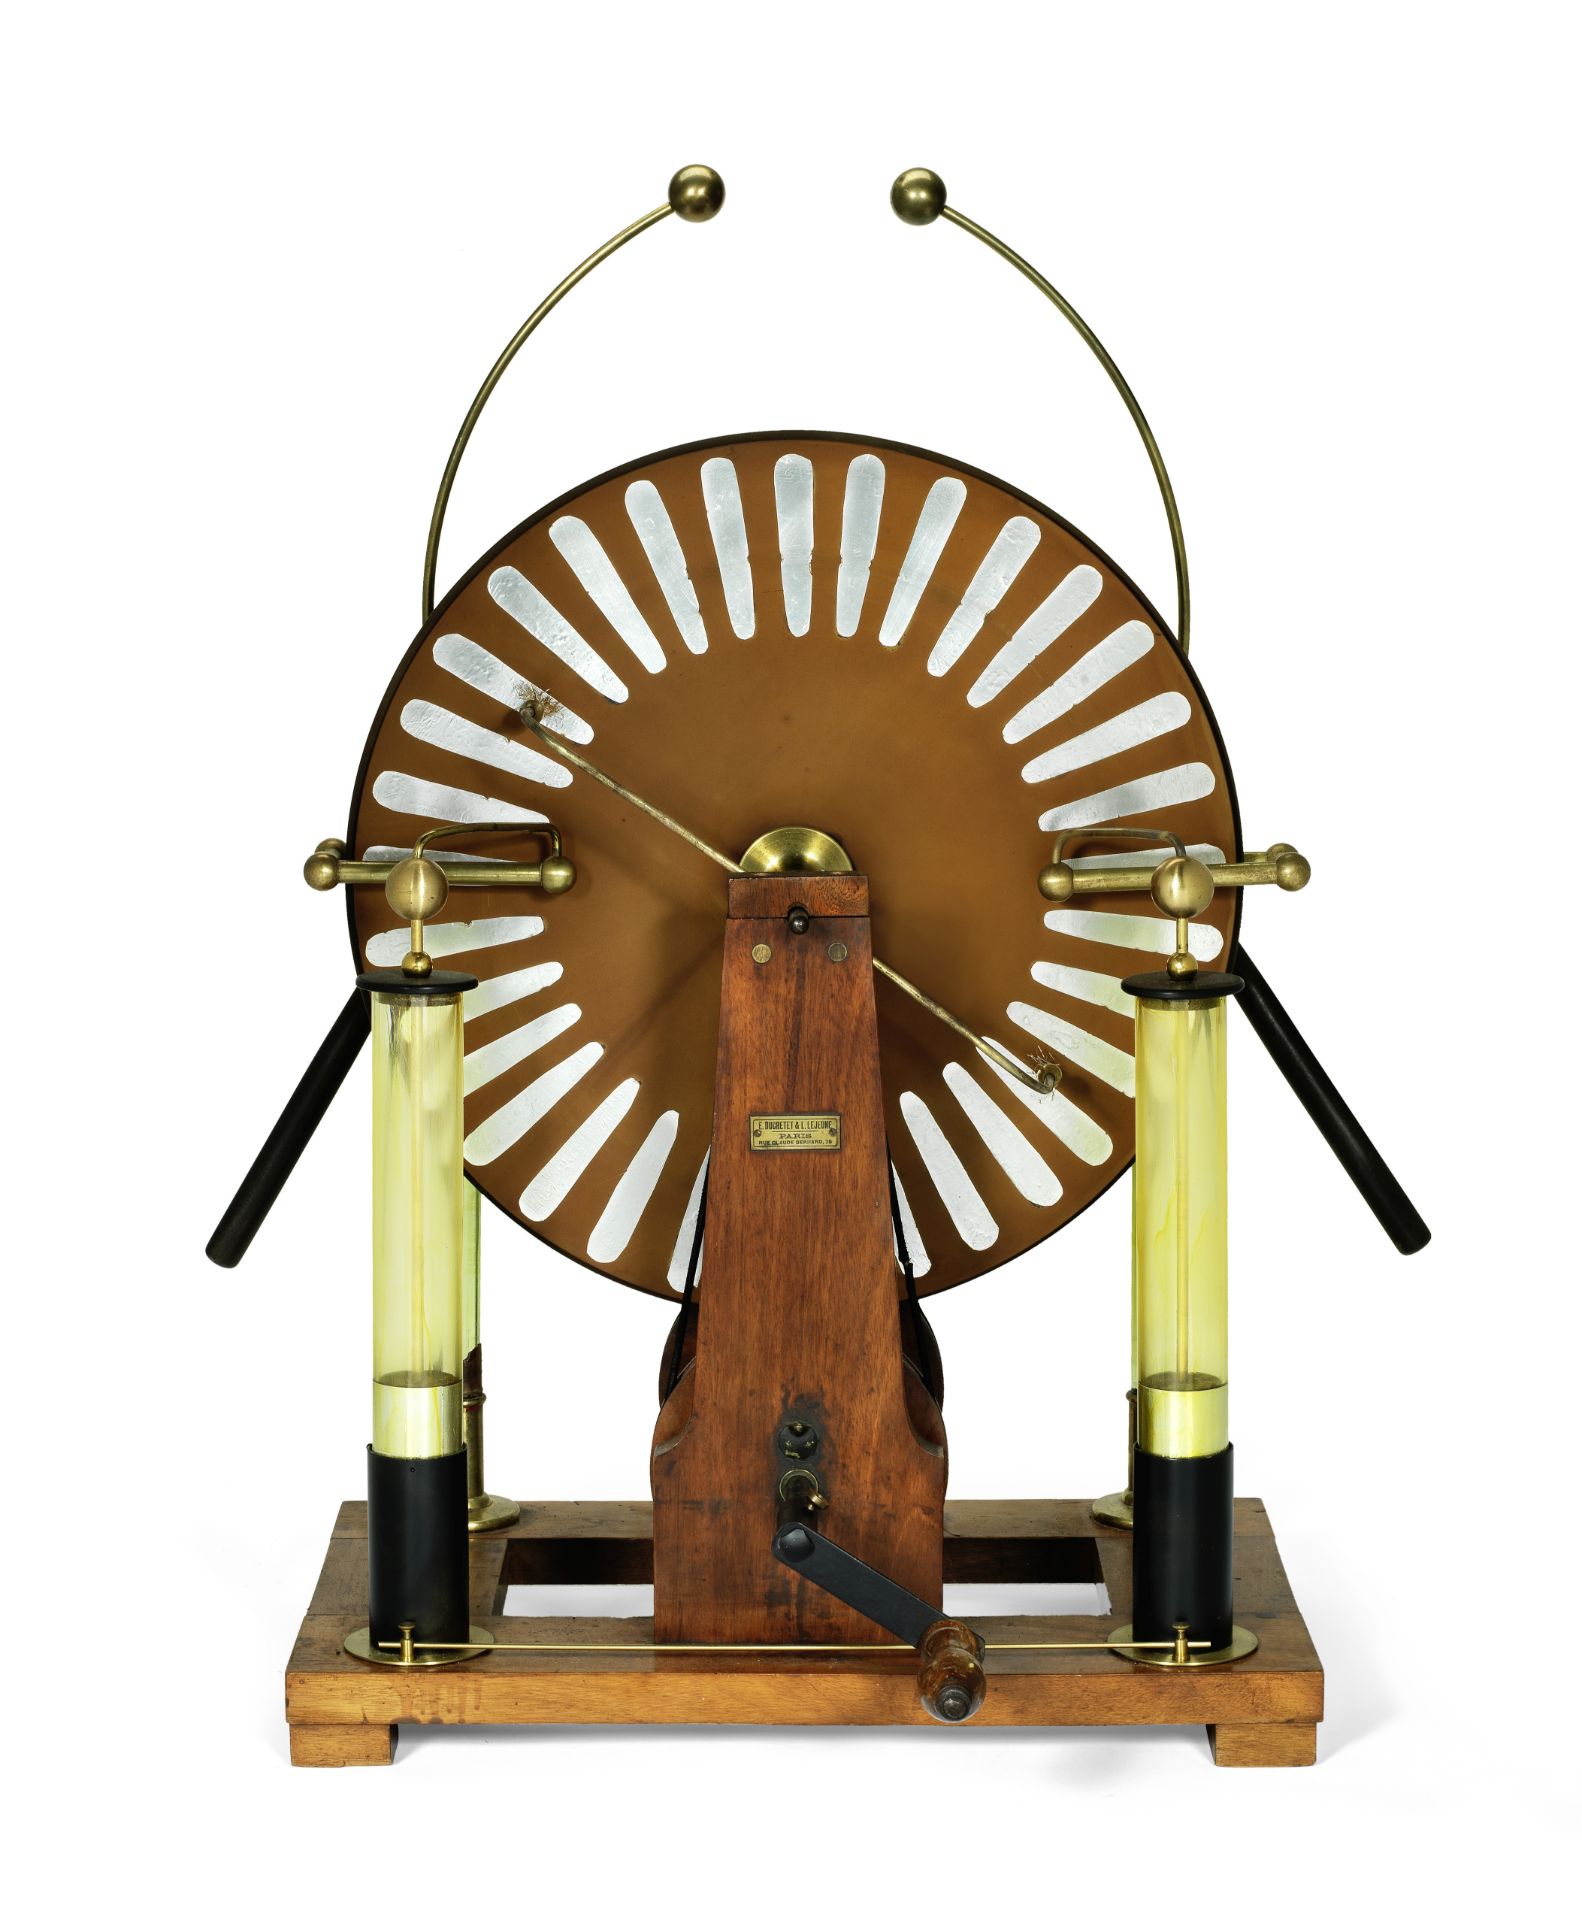 A Ducretet & Lejeune 18 1/2-inch twin disc Whimshurst machine, French, late 19th century,